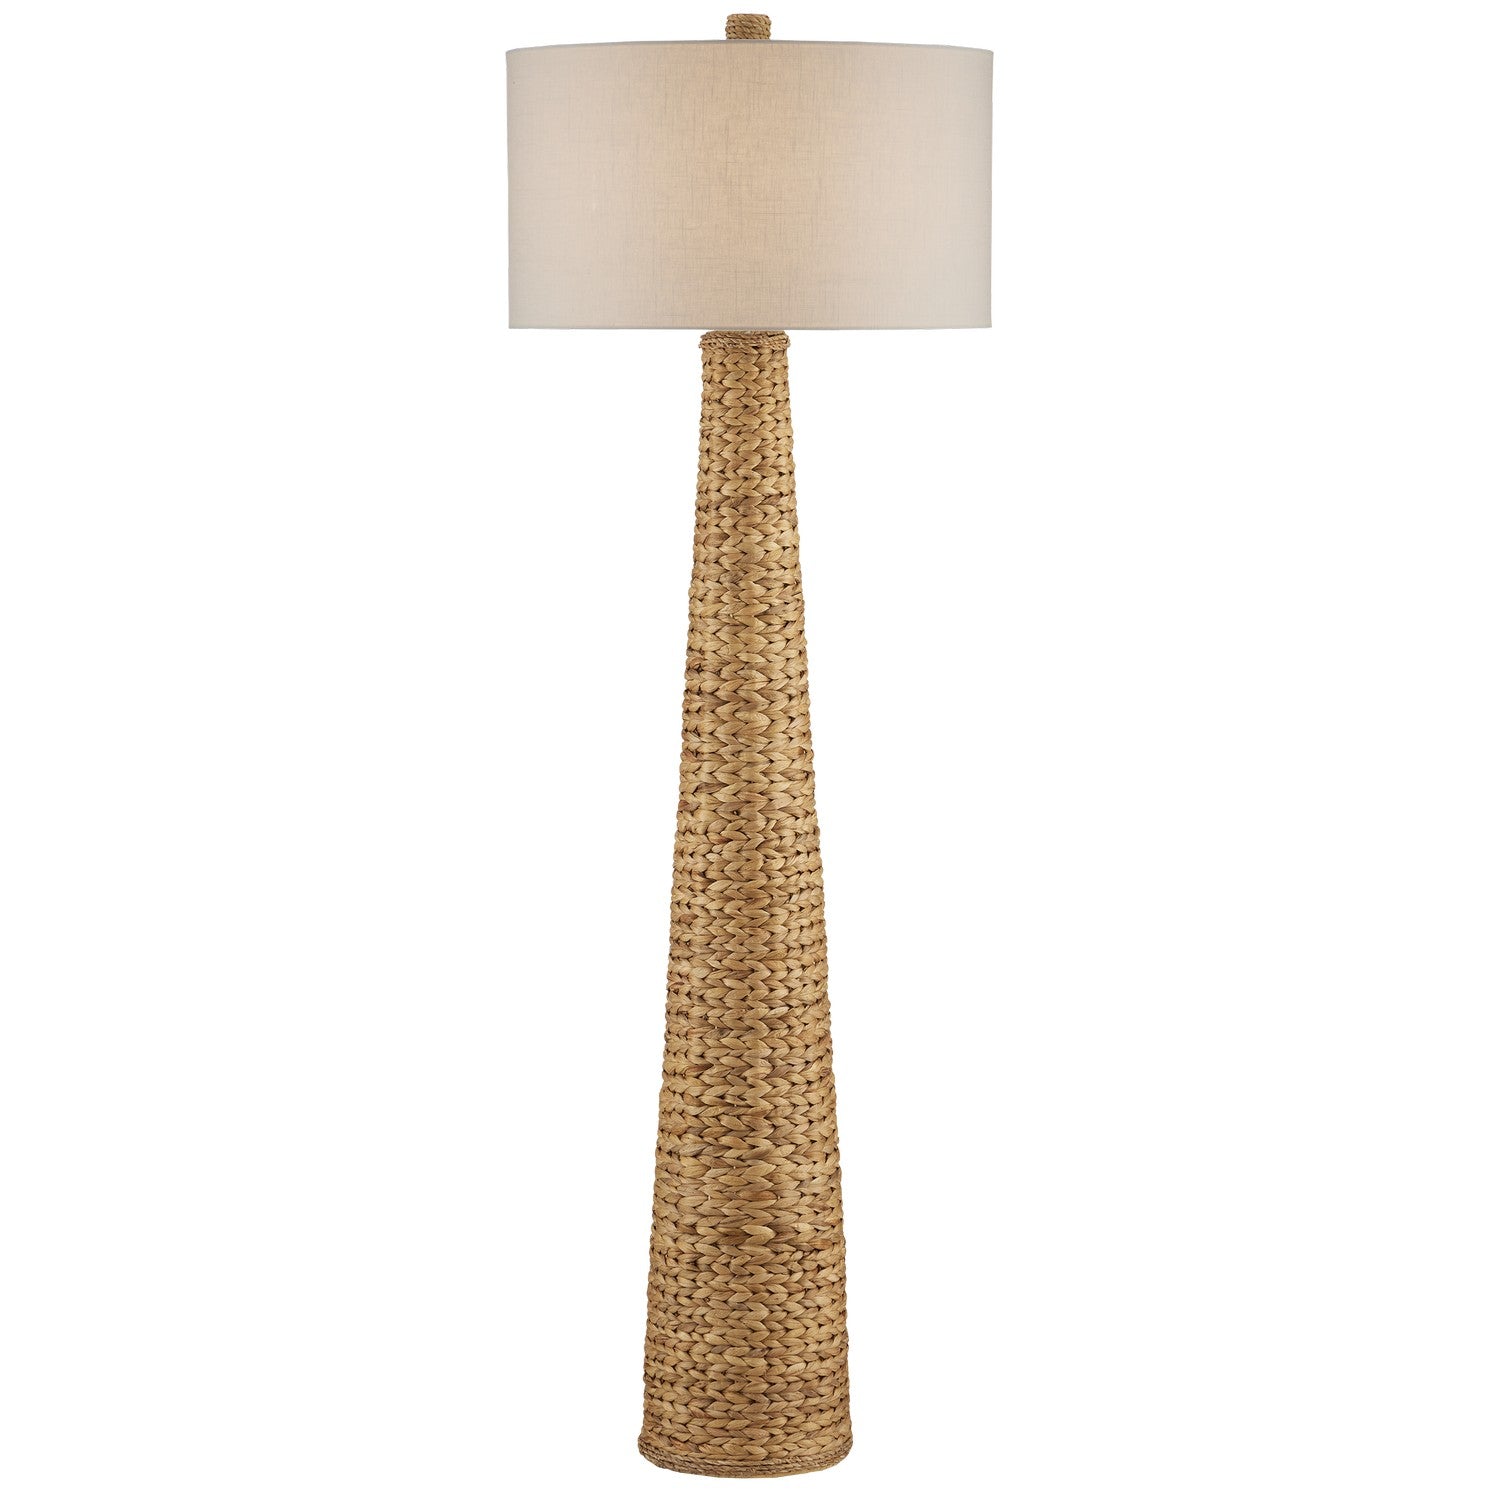 Currey and Company - 8000-0138 - One Light Floor Lamp - Natural